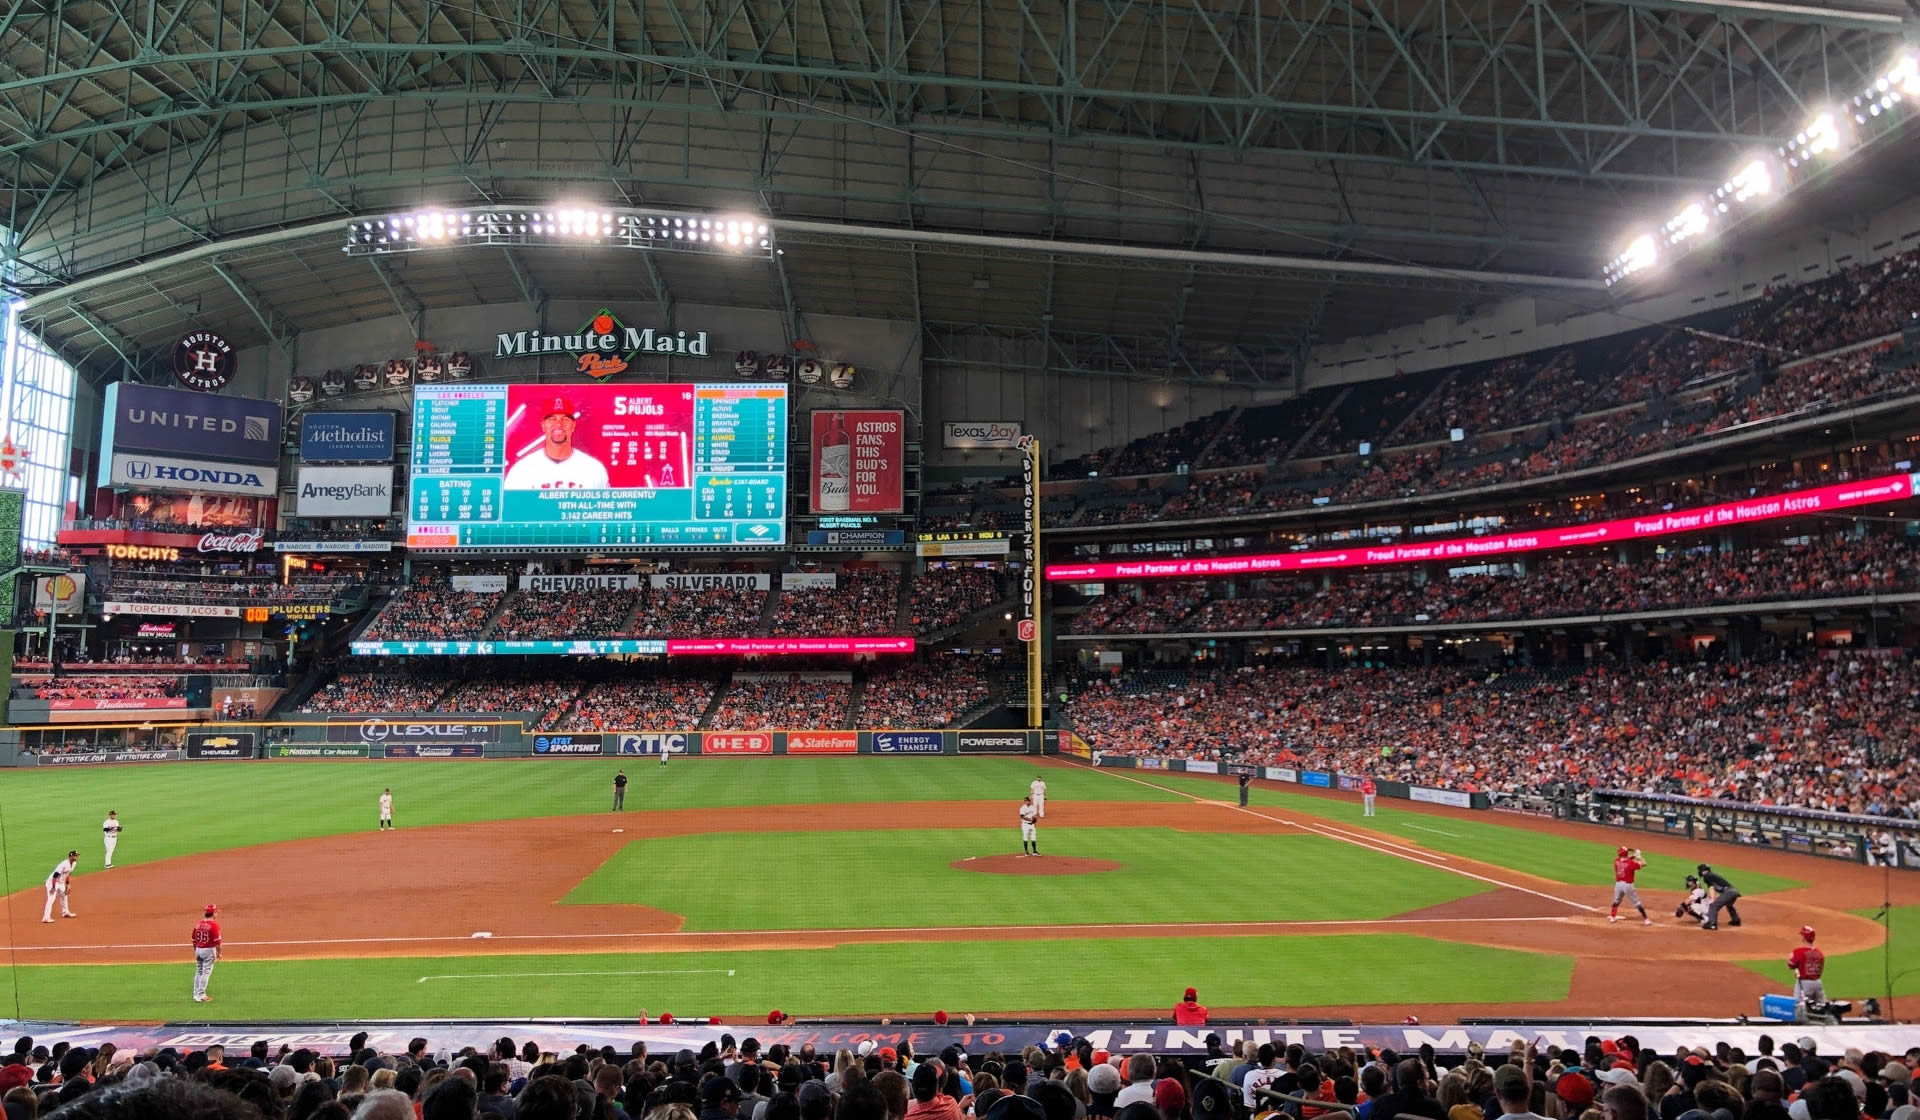 section 113, row 34 seat view  for baseball - minute maid park